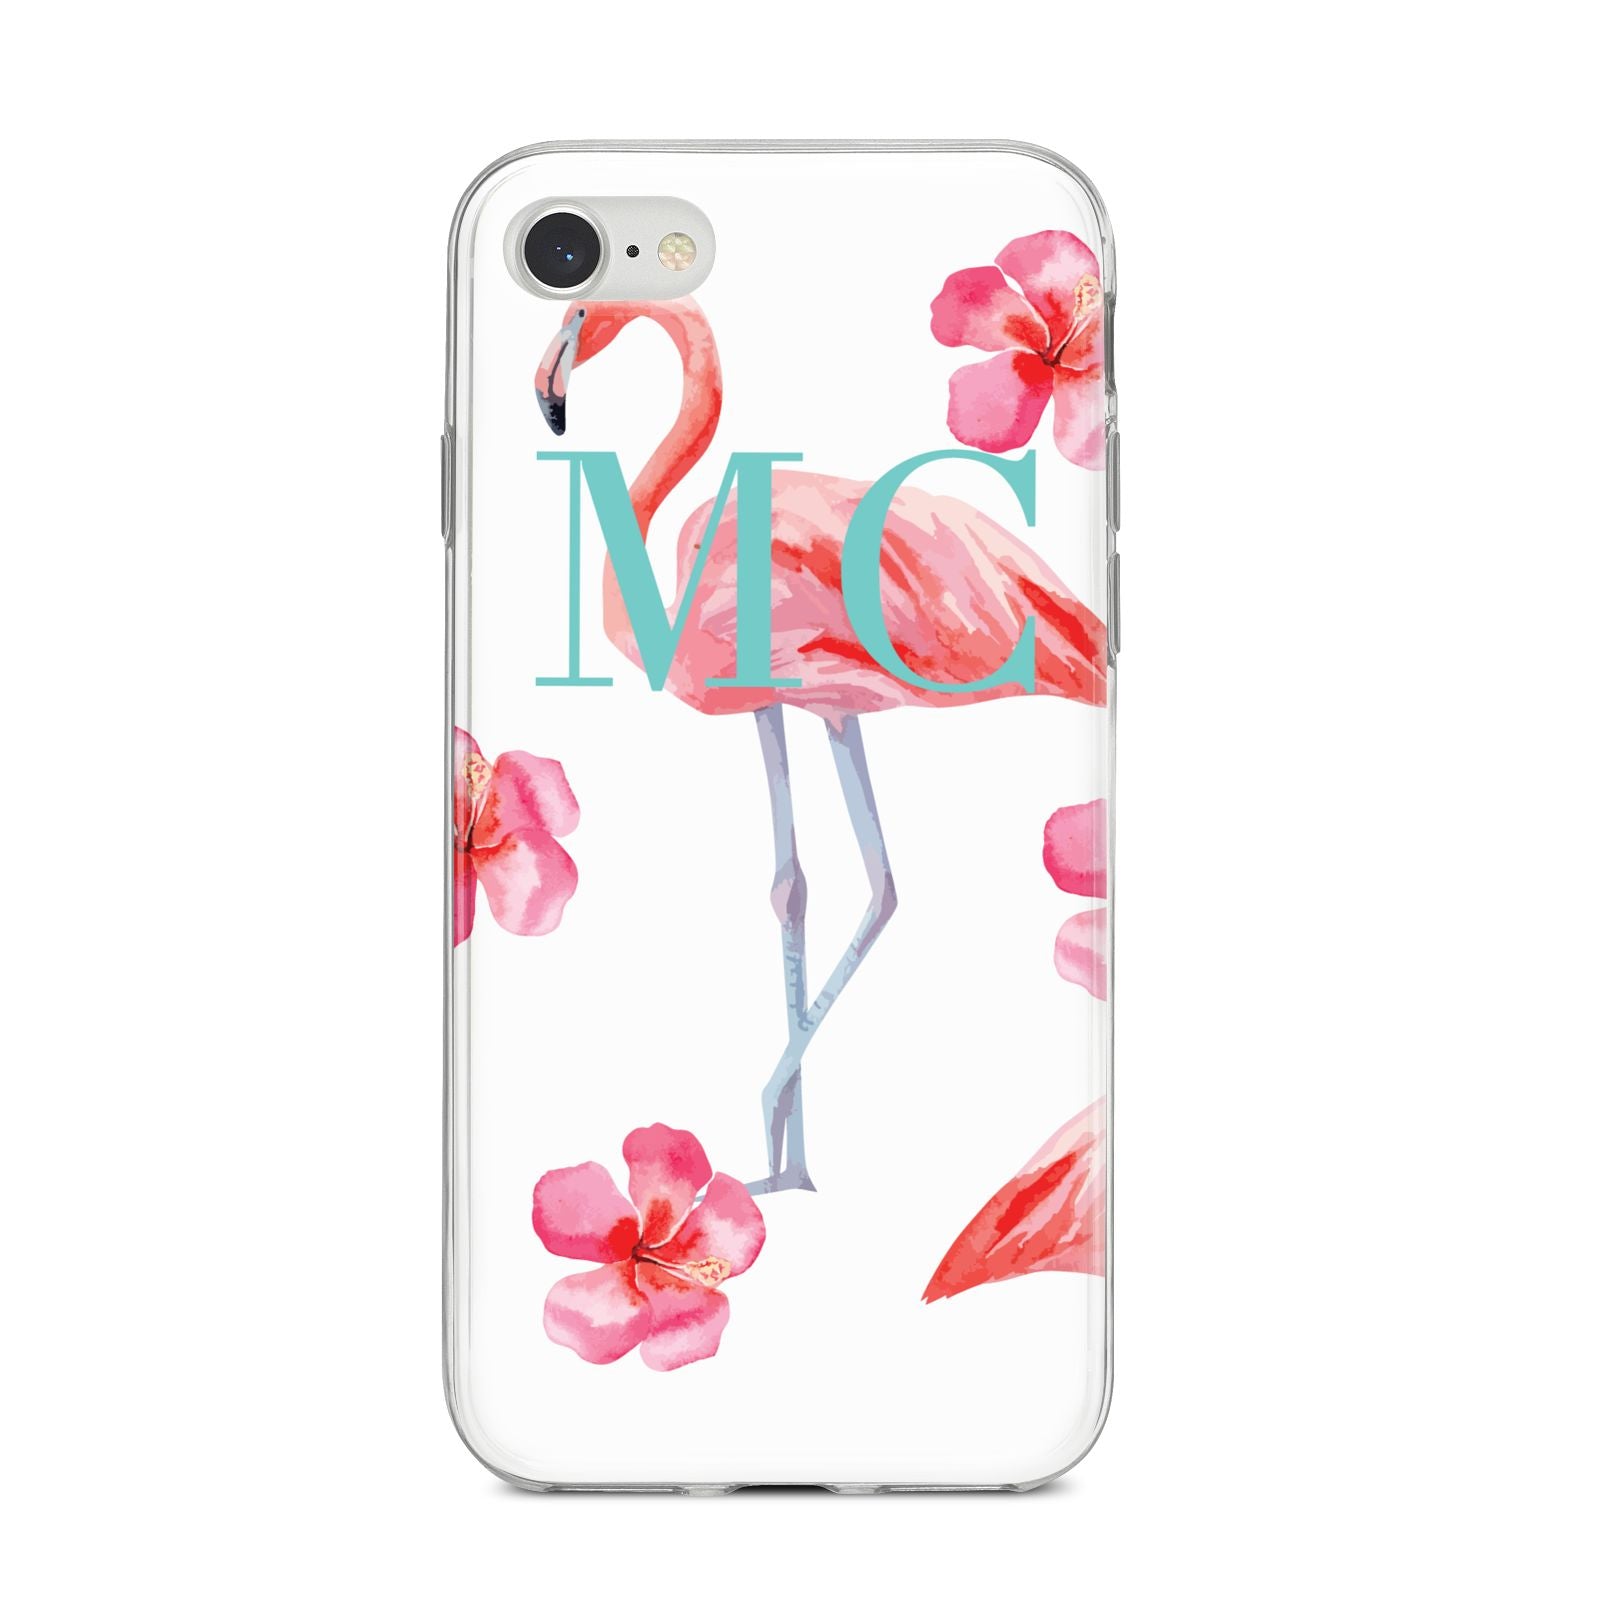 Personalised Initials Flamingo 3 iPhone 8 Bumper Case on Silver iPhone